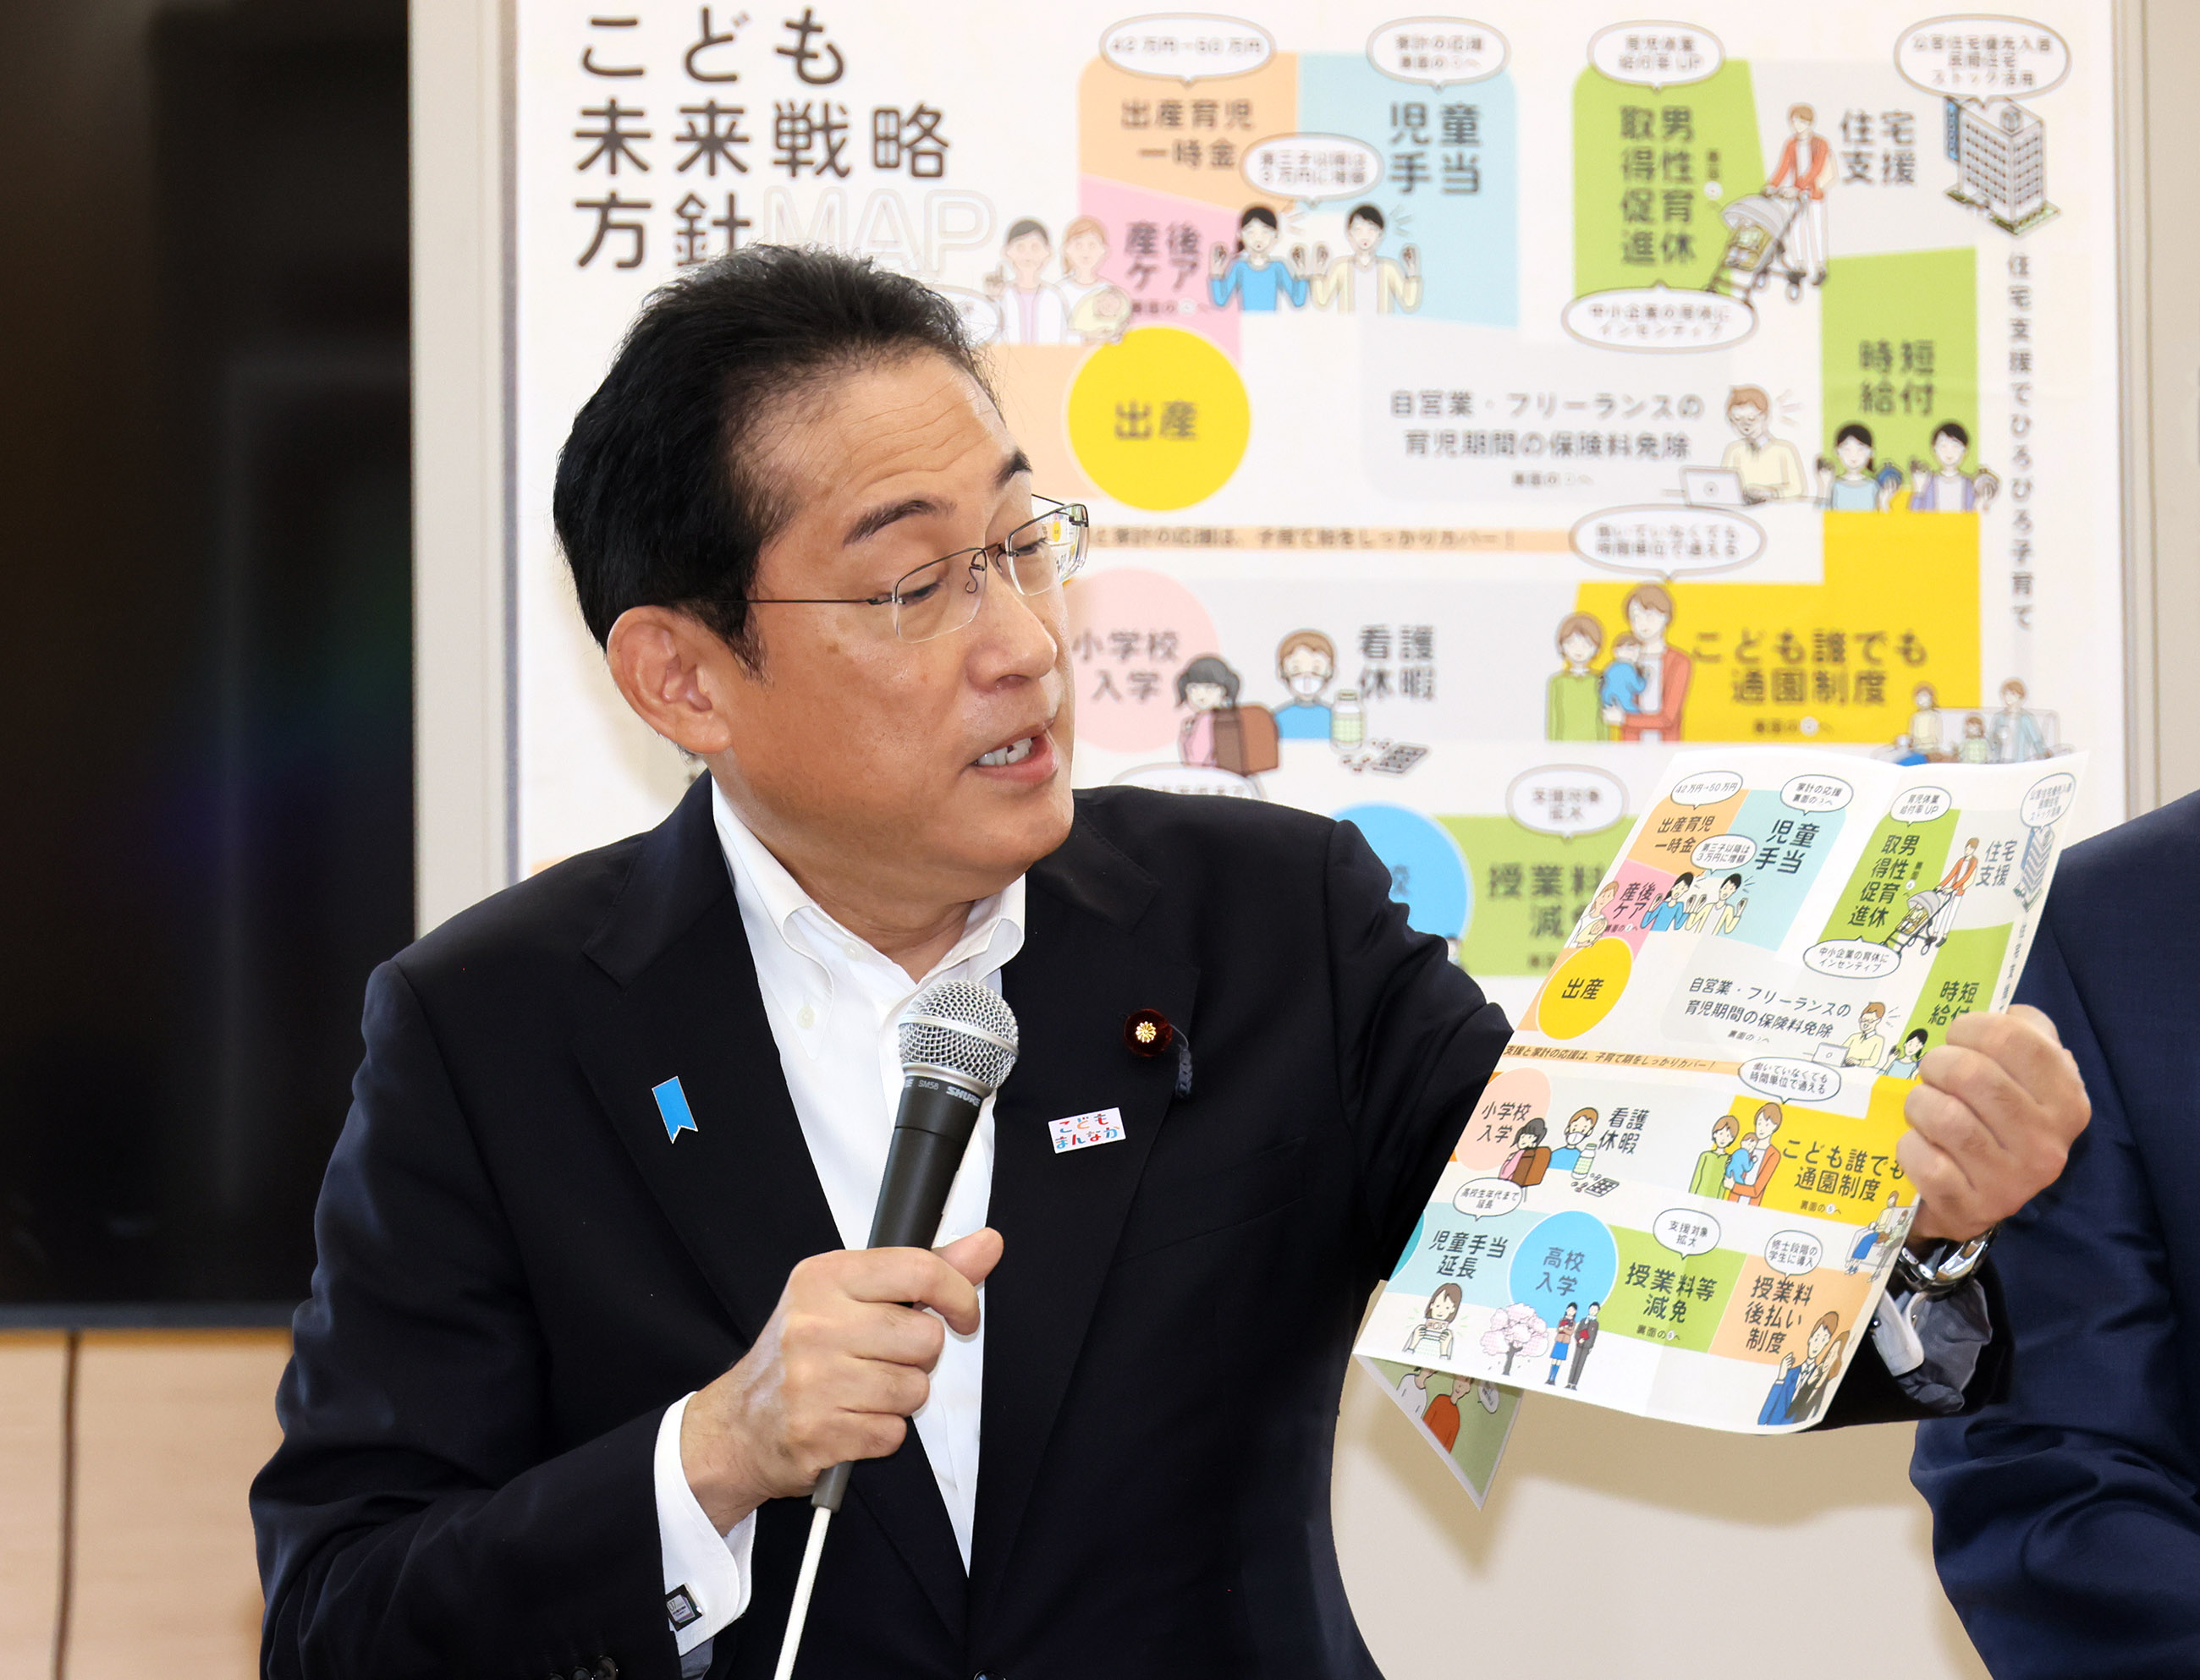 Prime Minister Kishida talking with participants of a public dialogue on policies related to children (1)